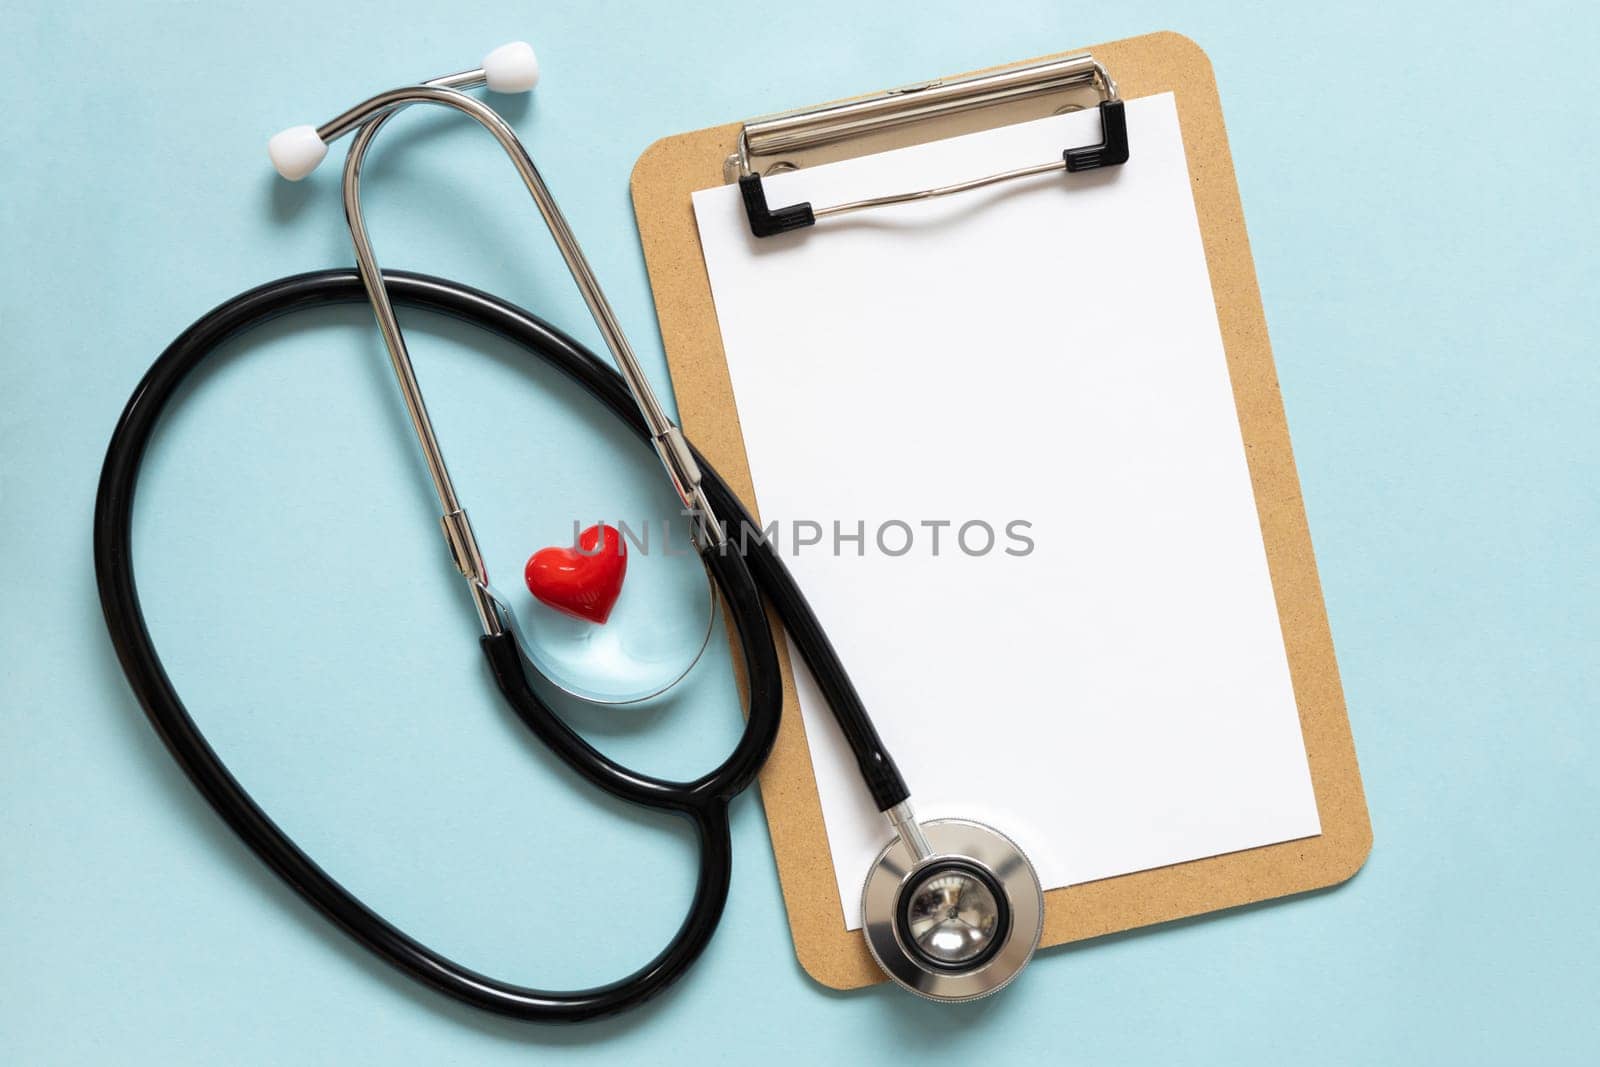 Cardiologist day. Stethoscope, flowers and heart shape, space for text on blue background by Ri6ka